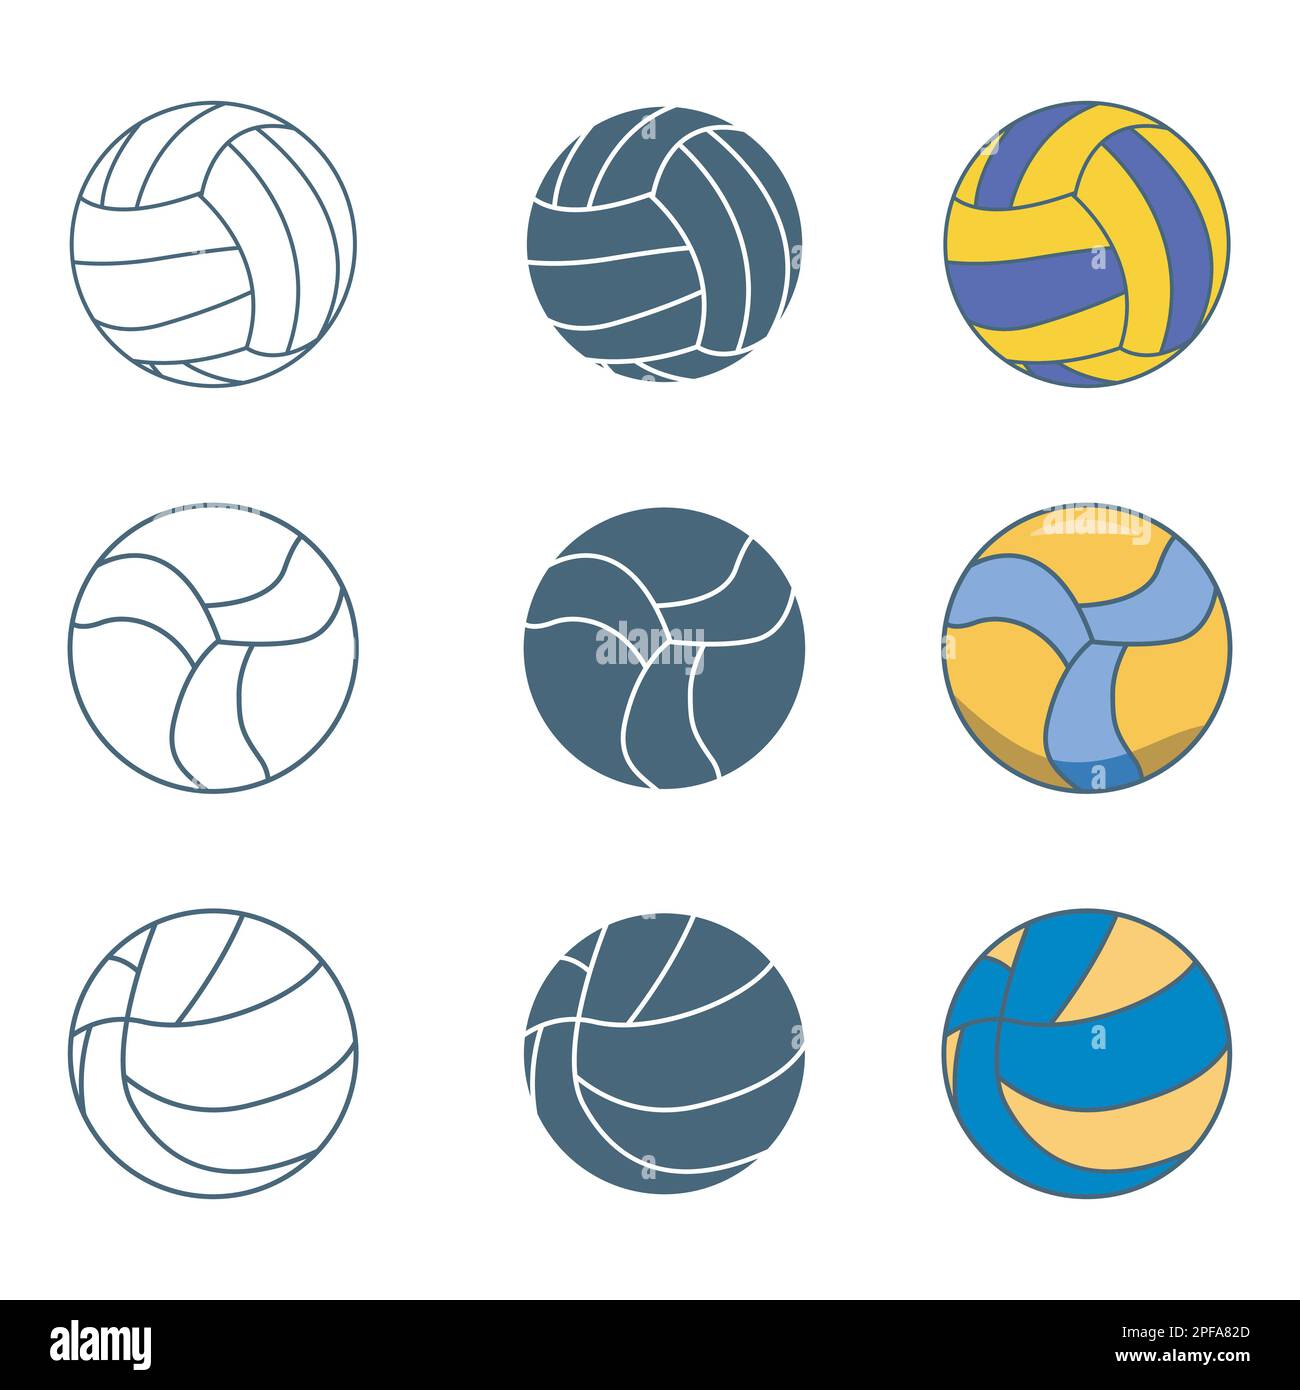 Volleyball silhouettes, Volleyball outline, Volleyball illustration set Stock Vector